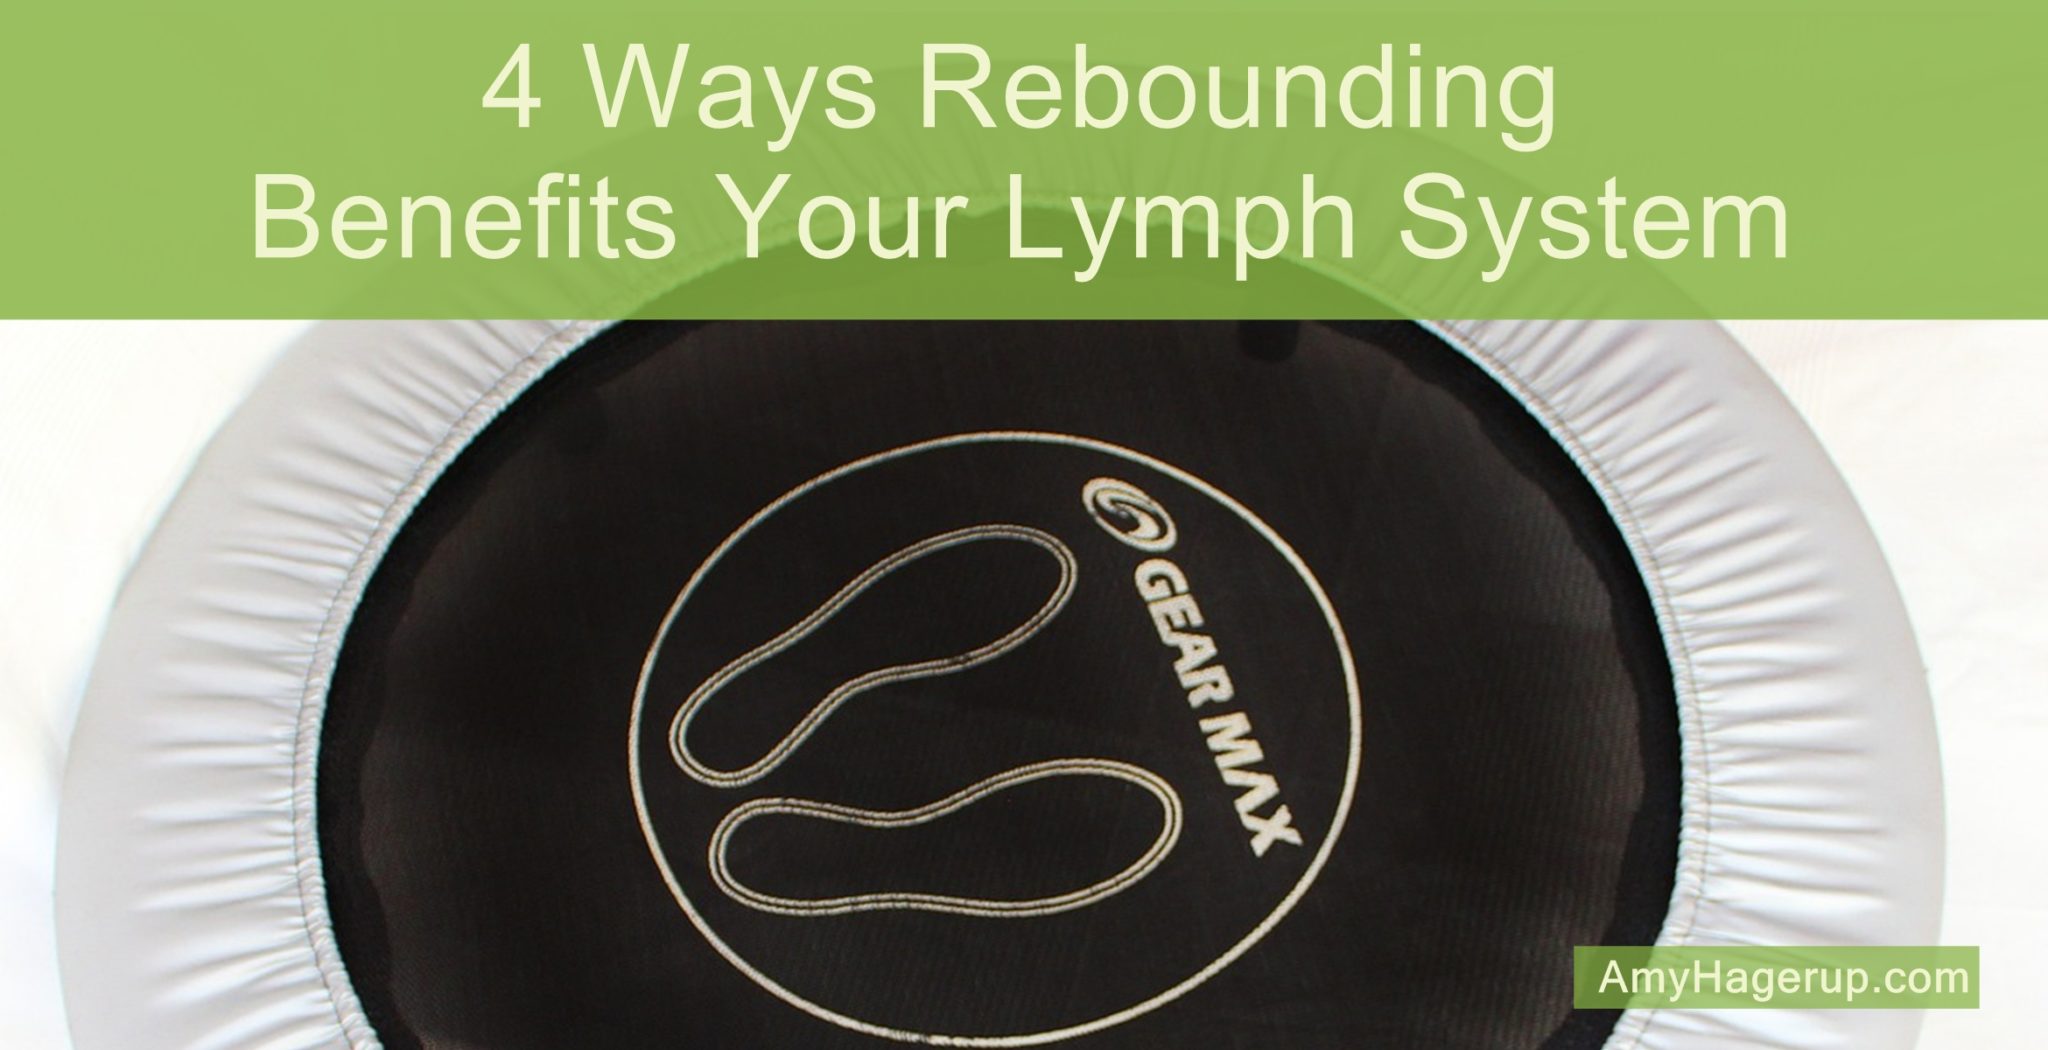 Here are 4 ways that rebounding benefits your lymph system